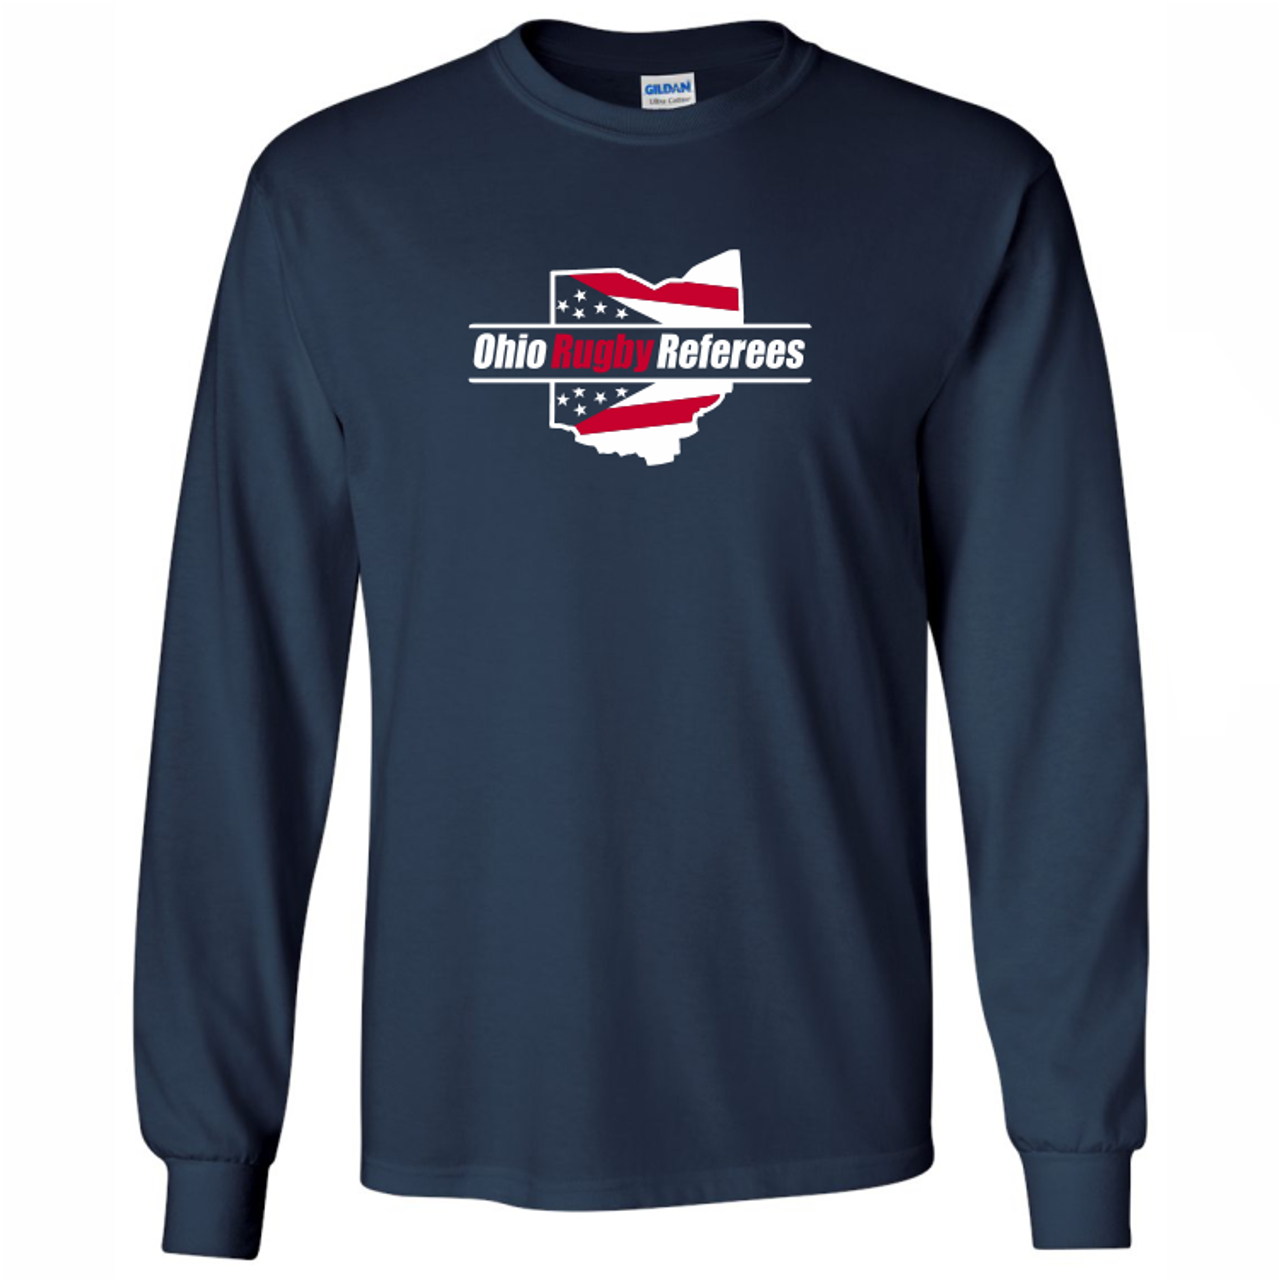 Ohio Rugby Referees T-Shirt, Navy